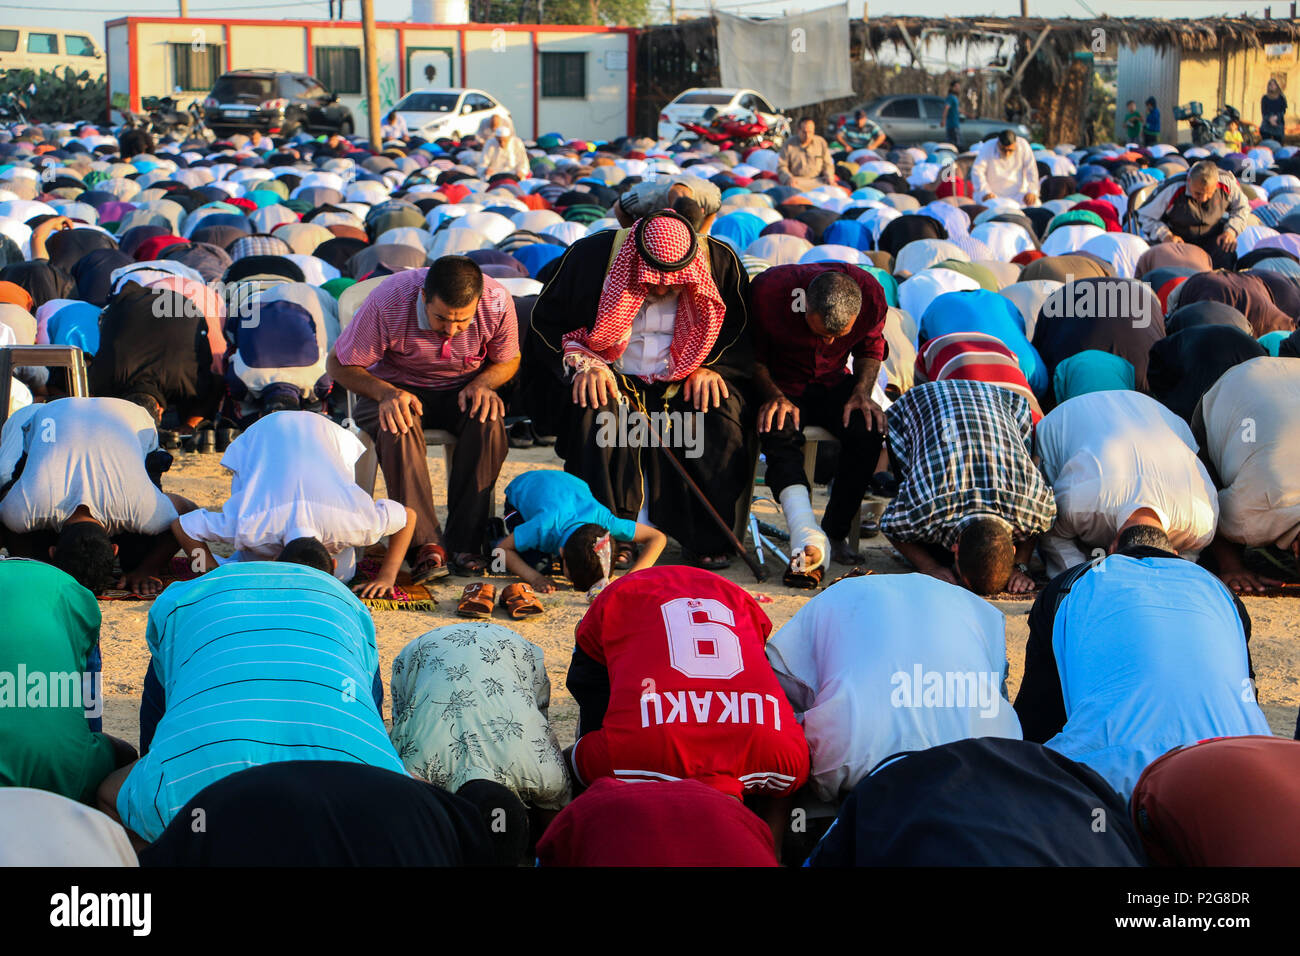 June 15, 2018 - Palestinian Muslims in Gaza celebrate Eid al-Fitr in the 'Return'' refugee camp along the eastern Gaza border, marking the end of the fasting month of Ramadan. Hamas political bureau chief, Ismail Haniya, and Hamas senior leader, Dr Khalil Al-Hayia, attended the al-Fitr celebrations and performed the Eid al-Fitr prayers alongside the other worshippers in the camp's open square. The 'Return'' refugee camp is located in the northeast of Gaza, close to the Nahal Oz border crossing. Eid al-Fitr is an important religious holiday for Muslims worldwide and it marks the end of Stock Photo